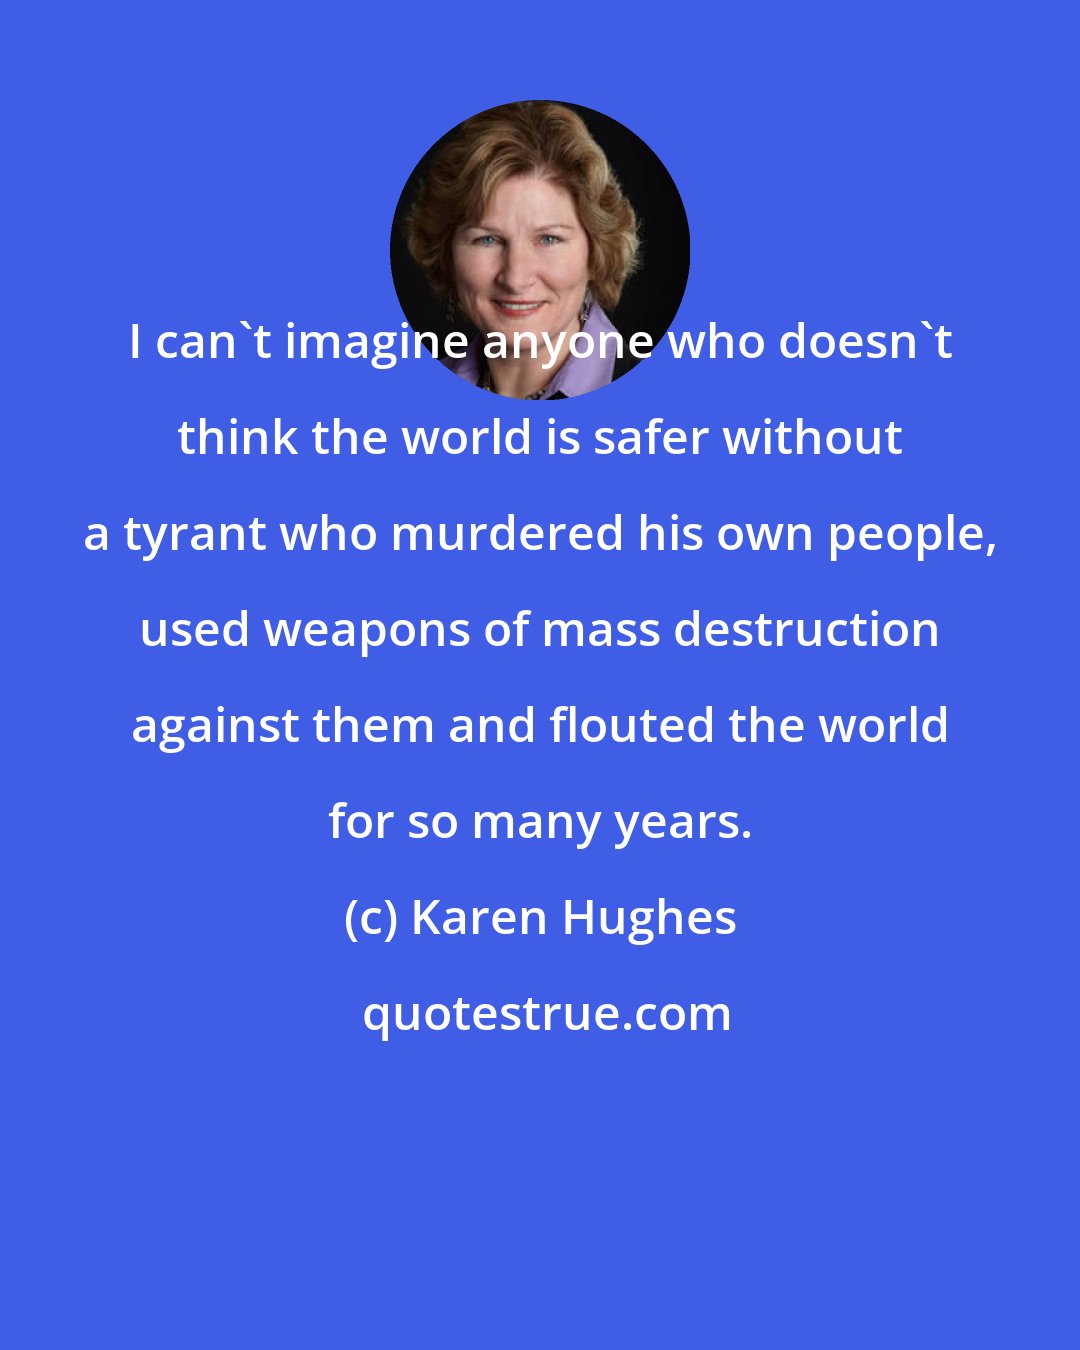 Karen Hughes: I can't imagine anyone who doesn't think the world is safer without a tyrant who murdered his own people, used weapons of mass destruction against them and flouted the world for so many years.